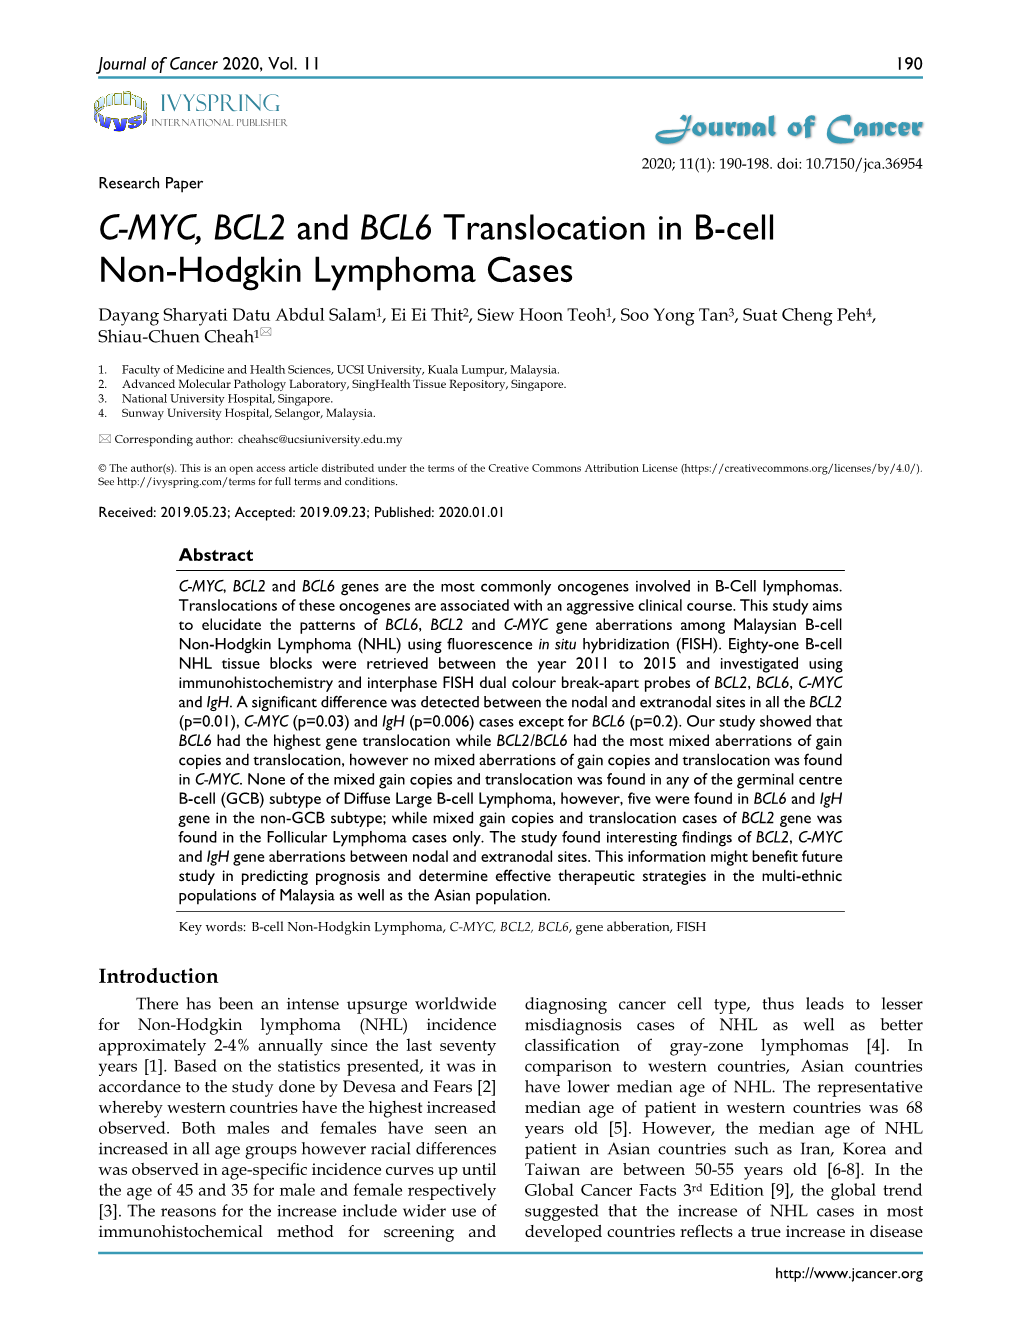 C-MYC, BCL2 and BCL6 Translocation in B-Cell Non-Hodgkin Lymphoma Cases